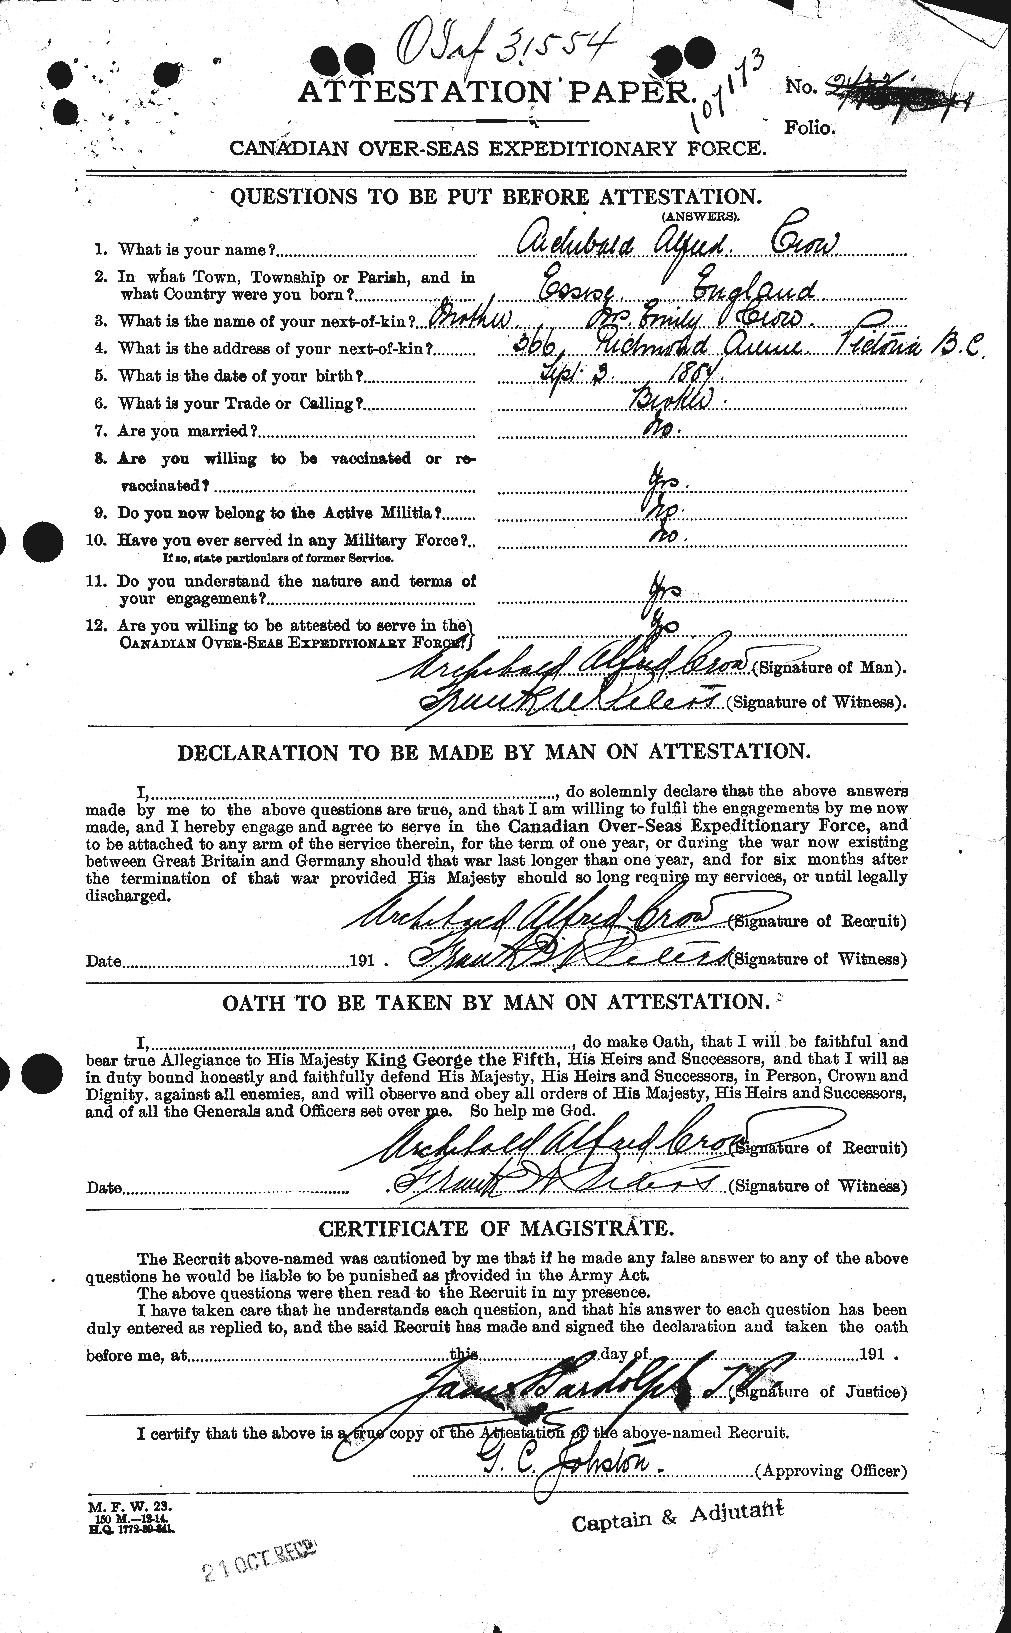 Personnel Records of the First World War - CEF 065552a